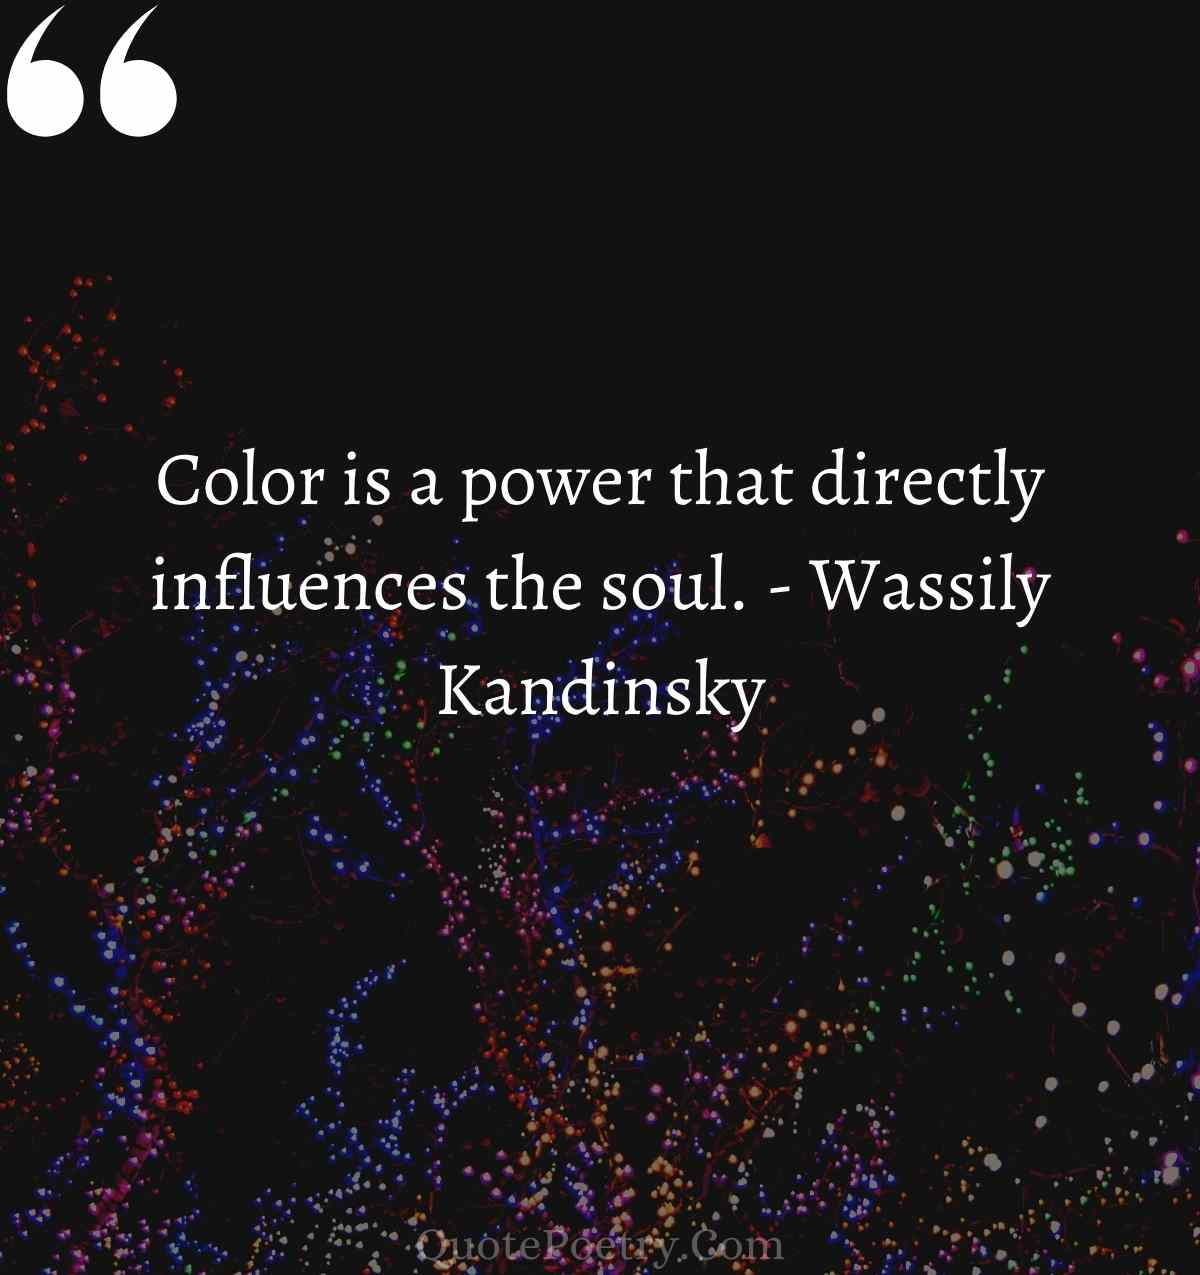 Life is Colorful Quotes